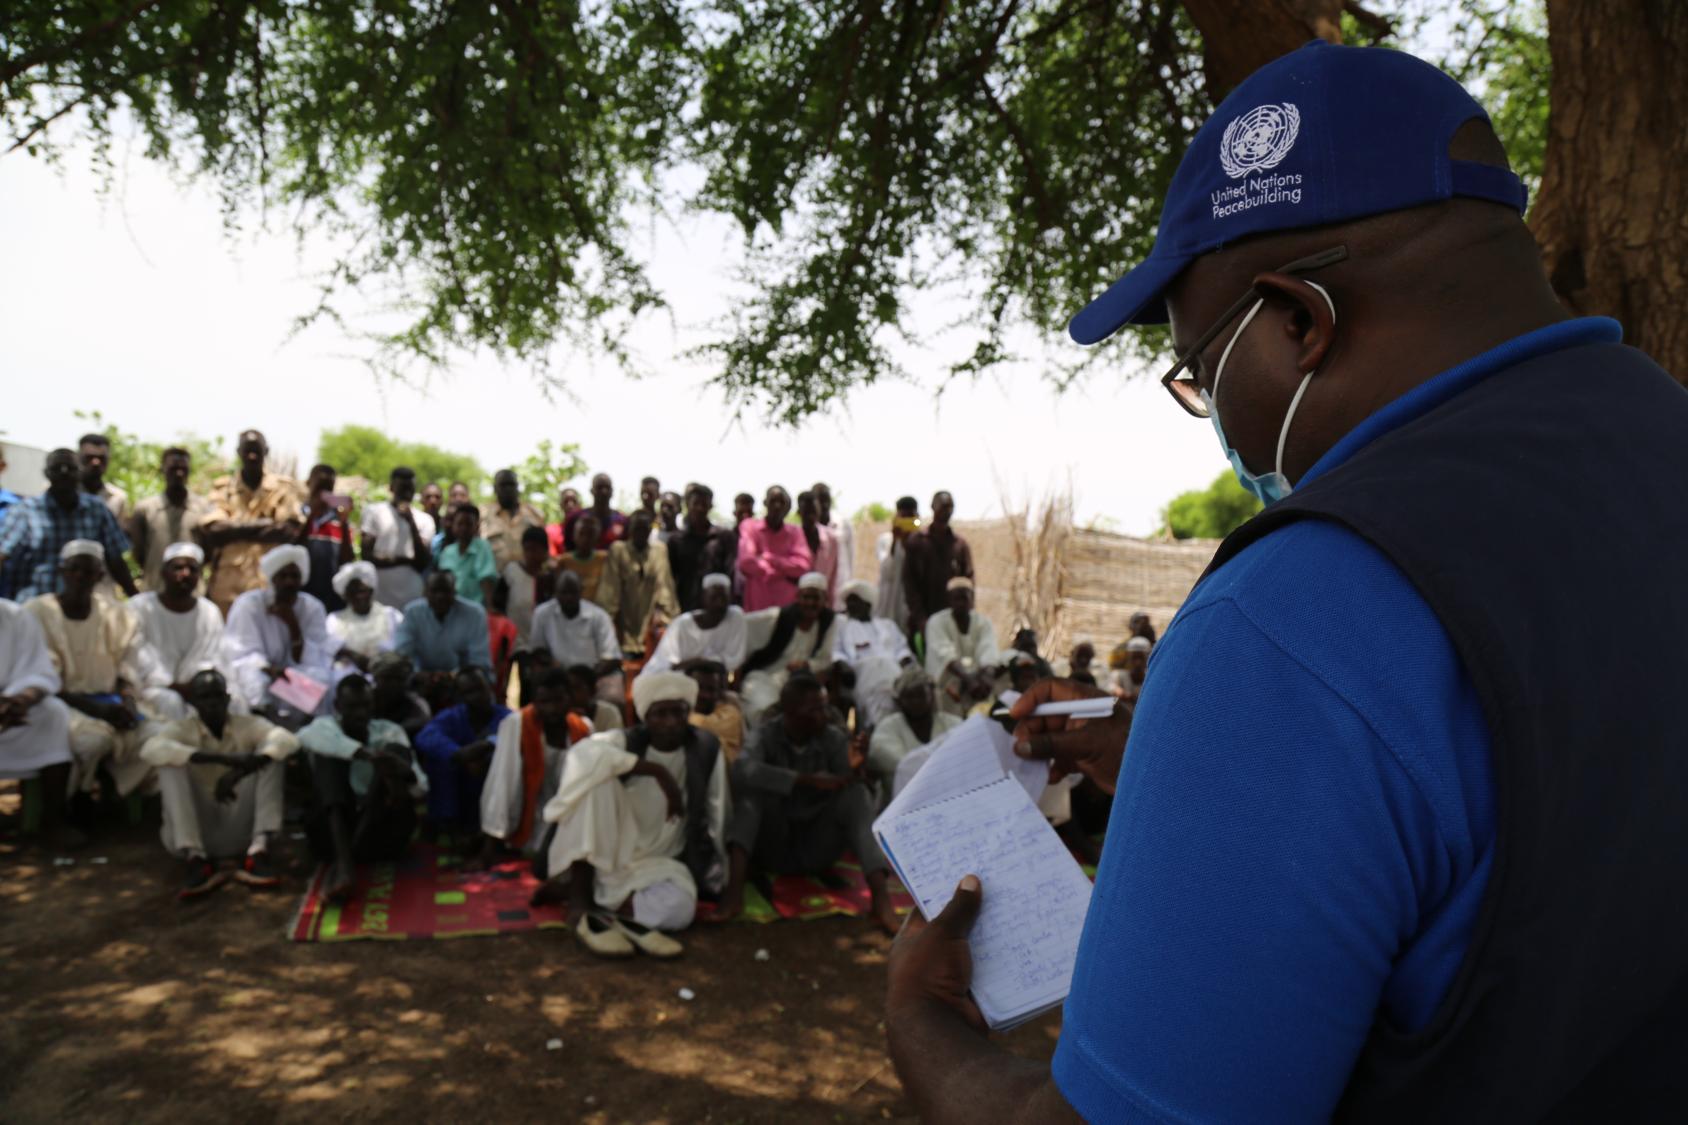 UN Peacekeeping staff speaking to a group of project beneficiaries in East Darfur 